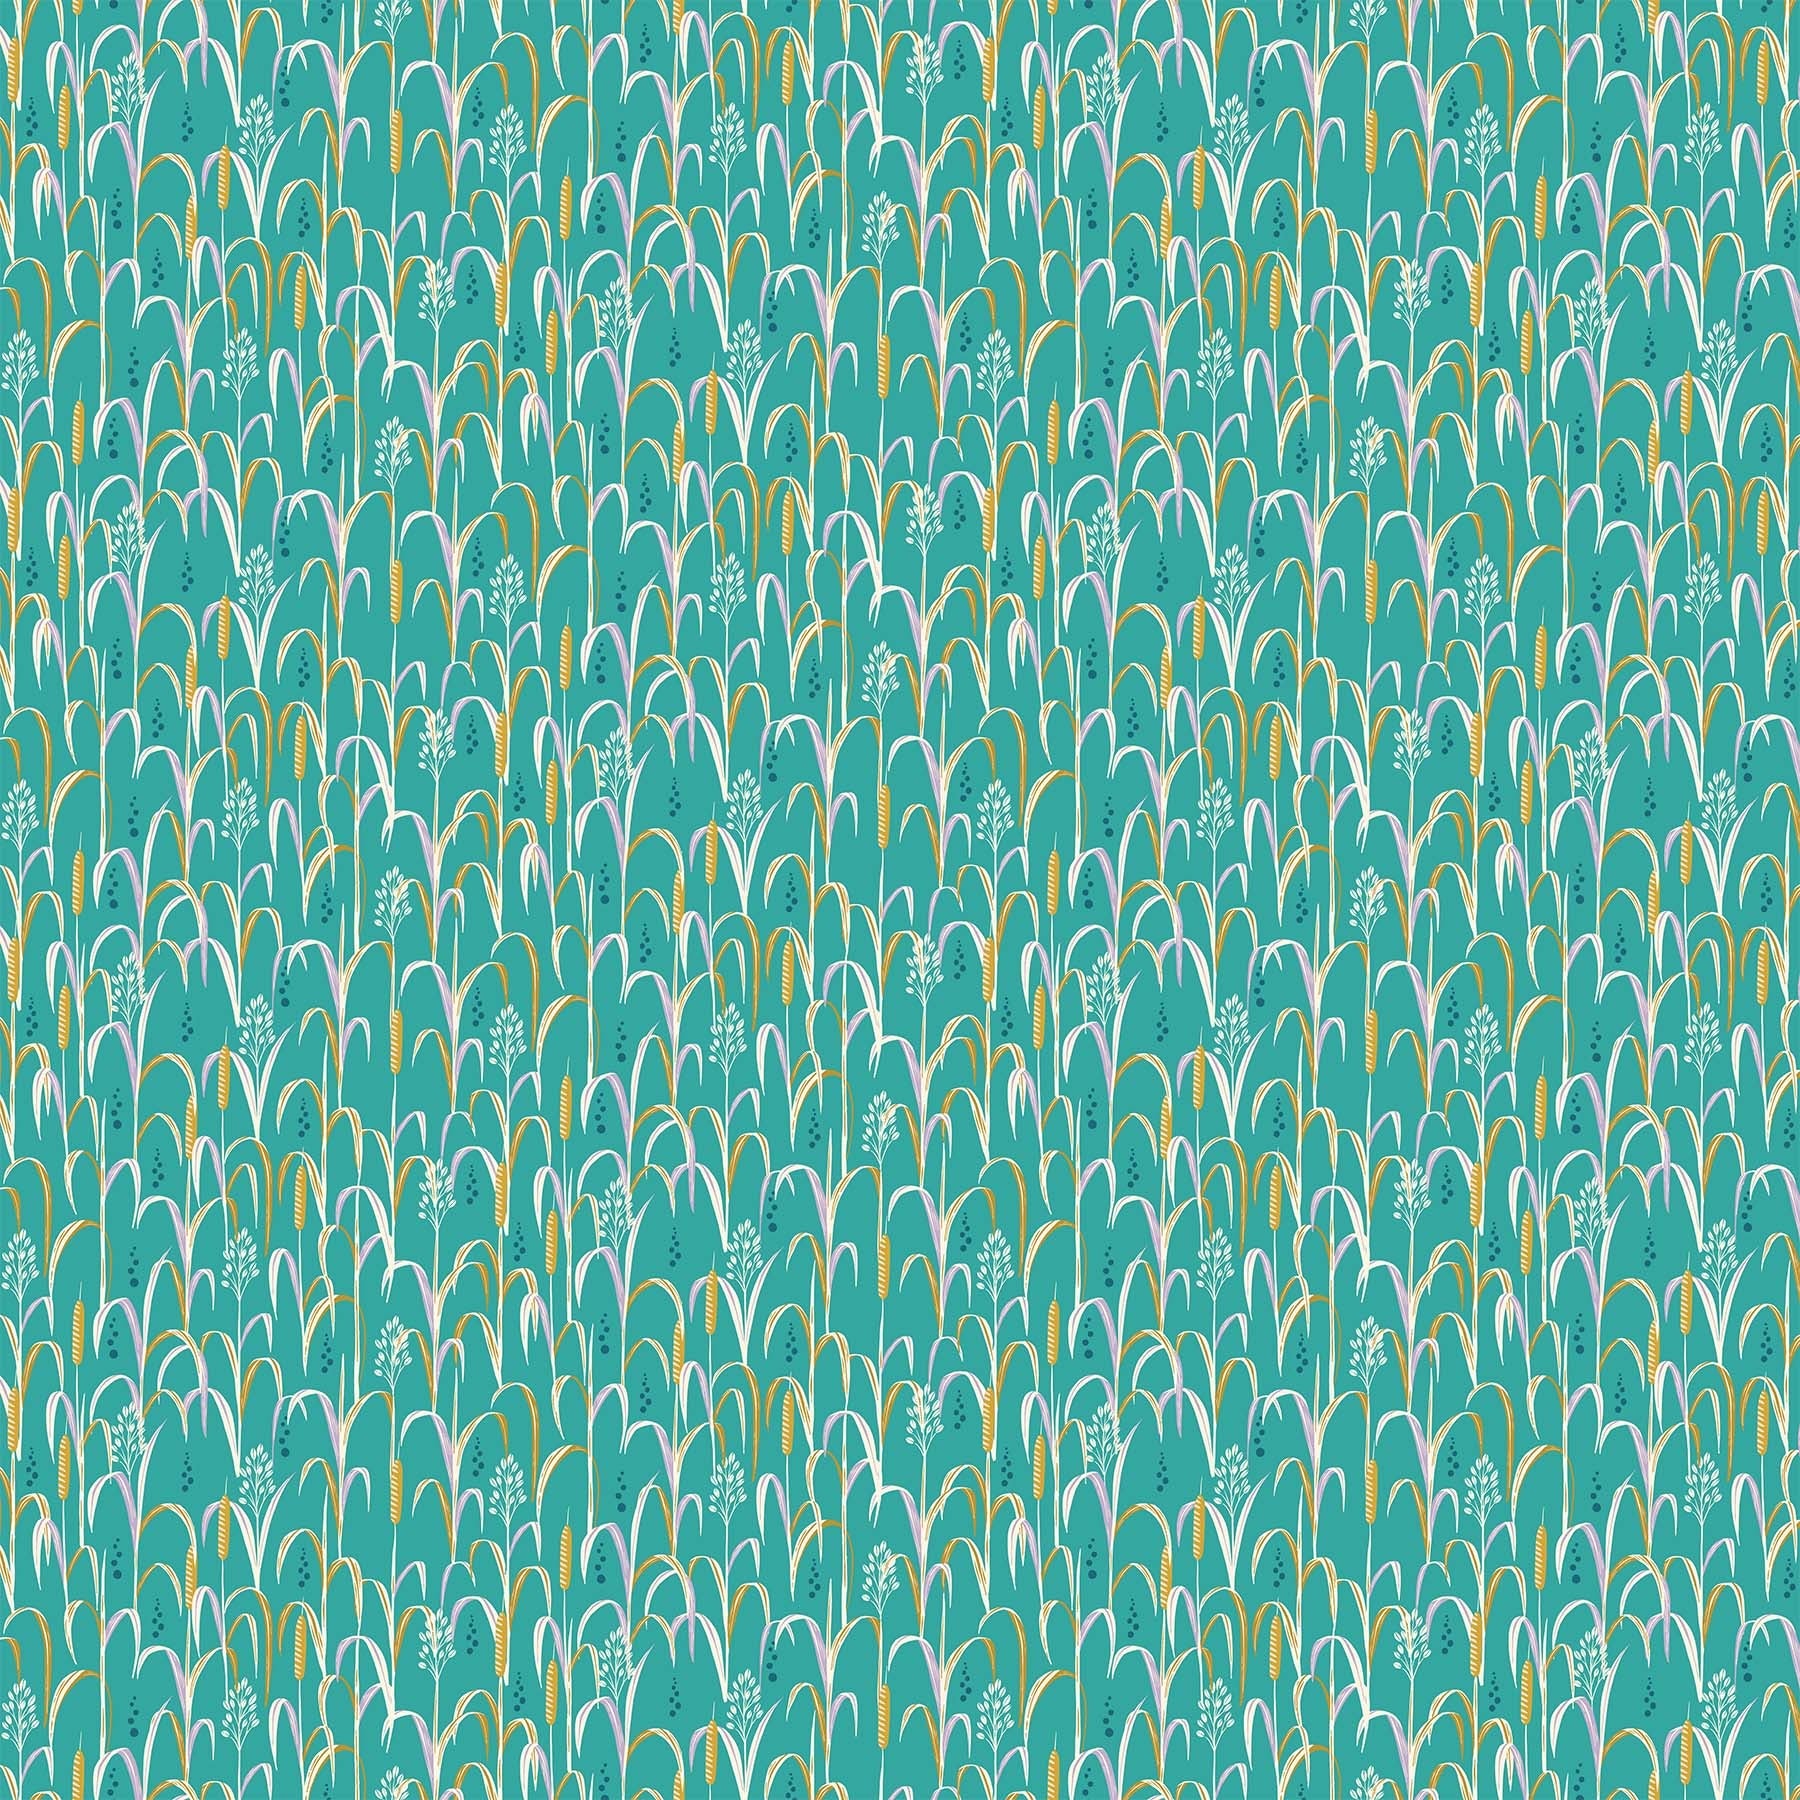 Cattails - Teal - Pond Tales - homesewn